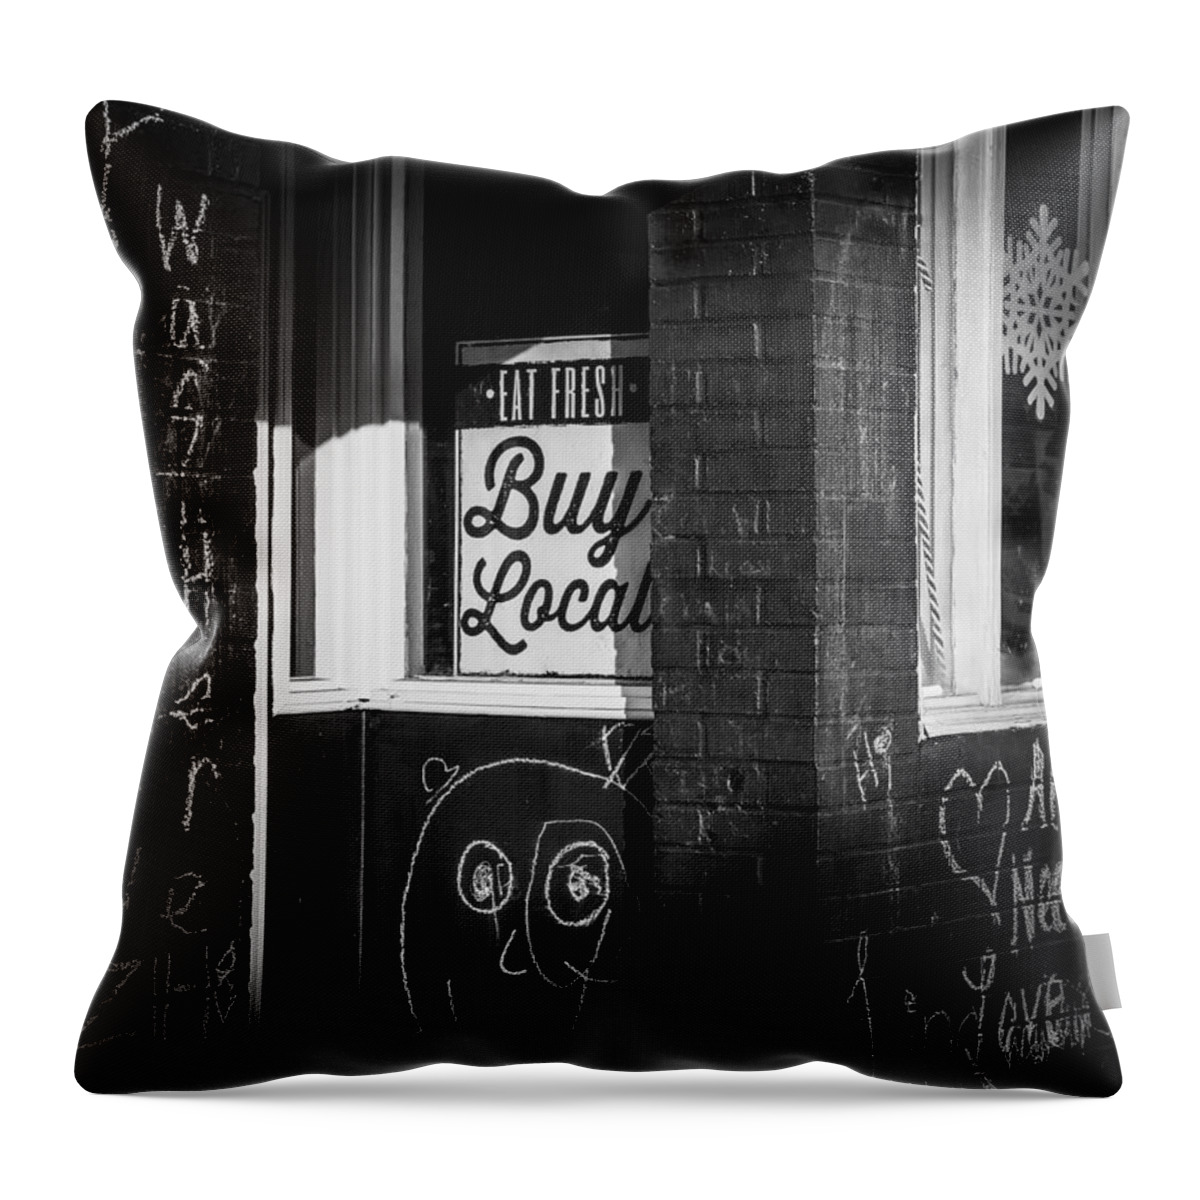  Throw Pillow featuring the photograph Buy Local by Rodney Lee Williams